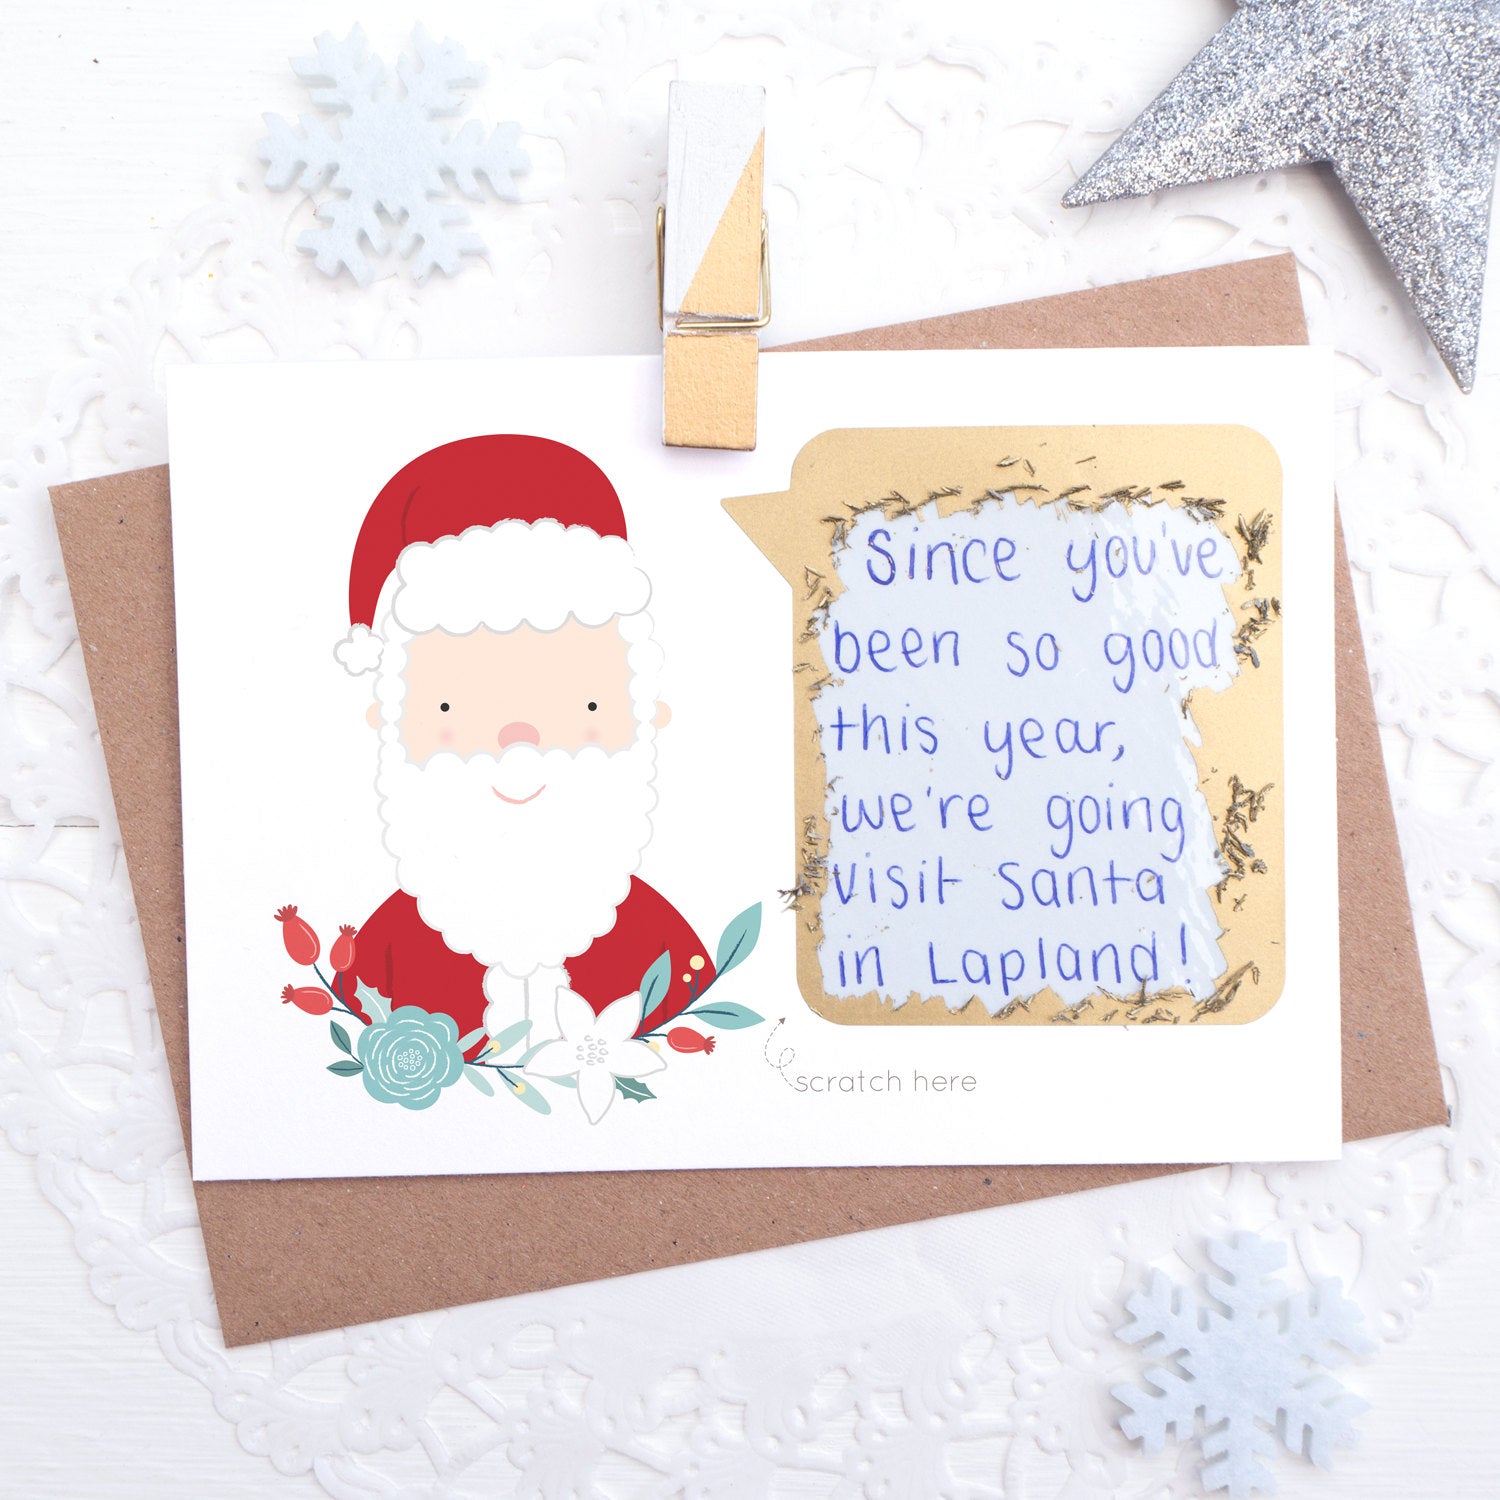 Personalised christmas message scratch and reveal card featuring father christmas